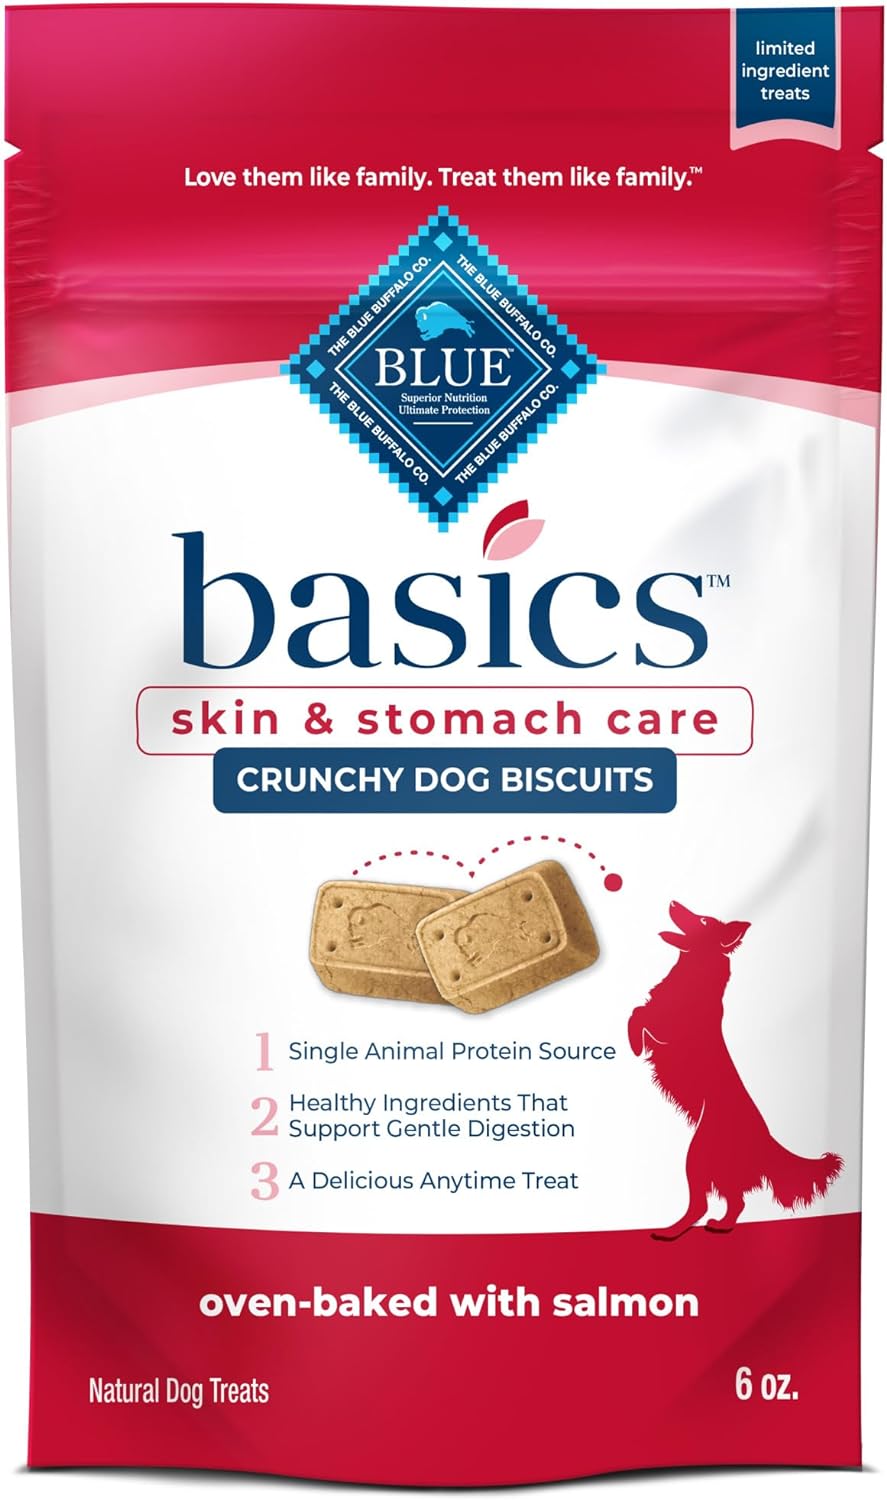 Blue Buffalo Basics Crunchy Dog Biscuits for Skin & Stomach Care, Limited Ingredient Diet Dog Treats, Salmon & Potato Recipe, 6-oz. Bag